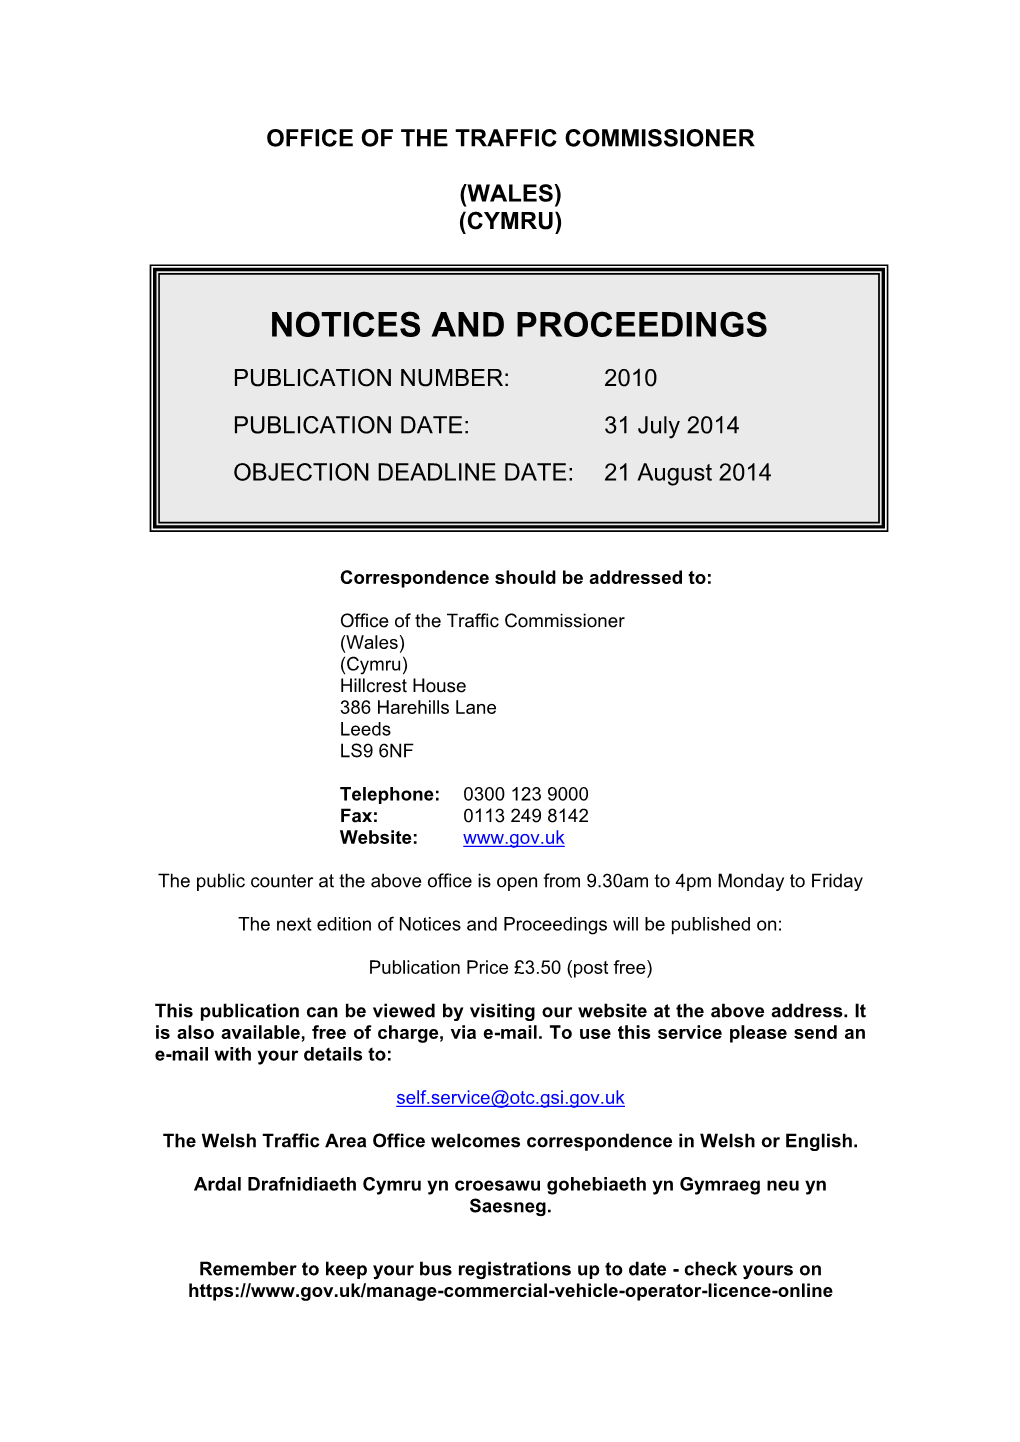 Notices and Proceedings 31 July 2014